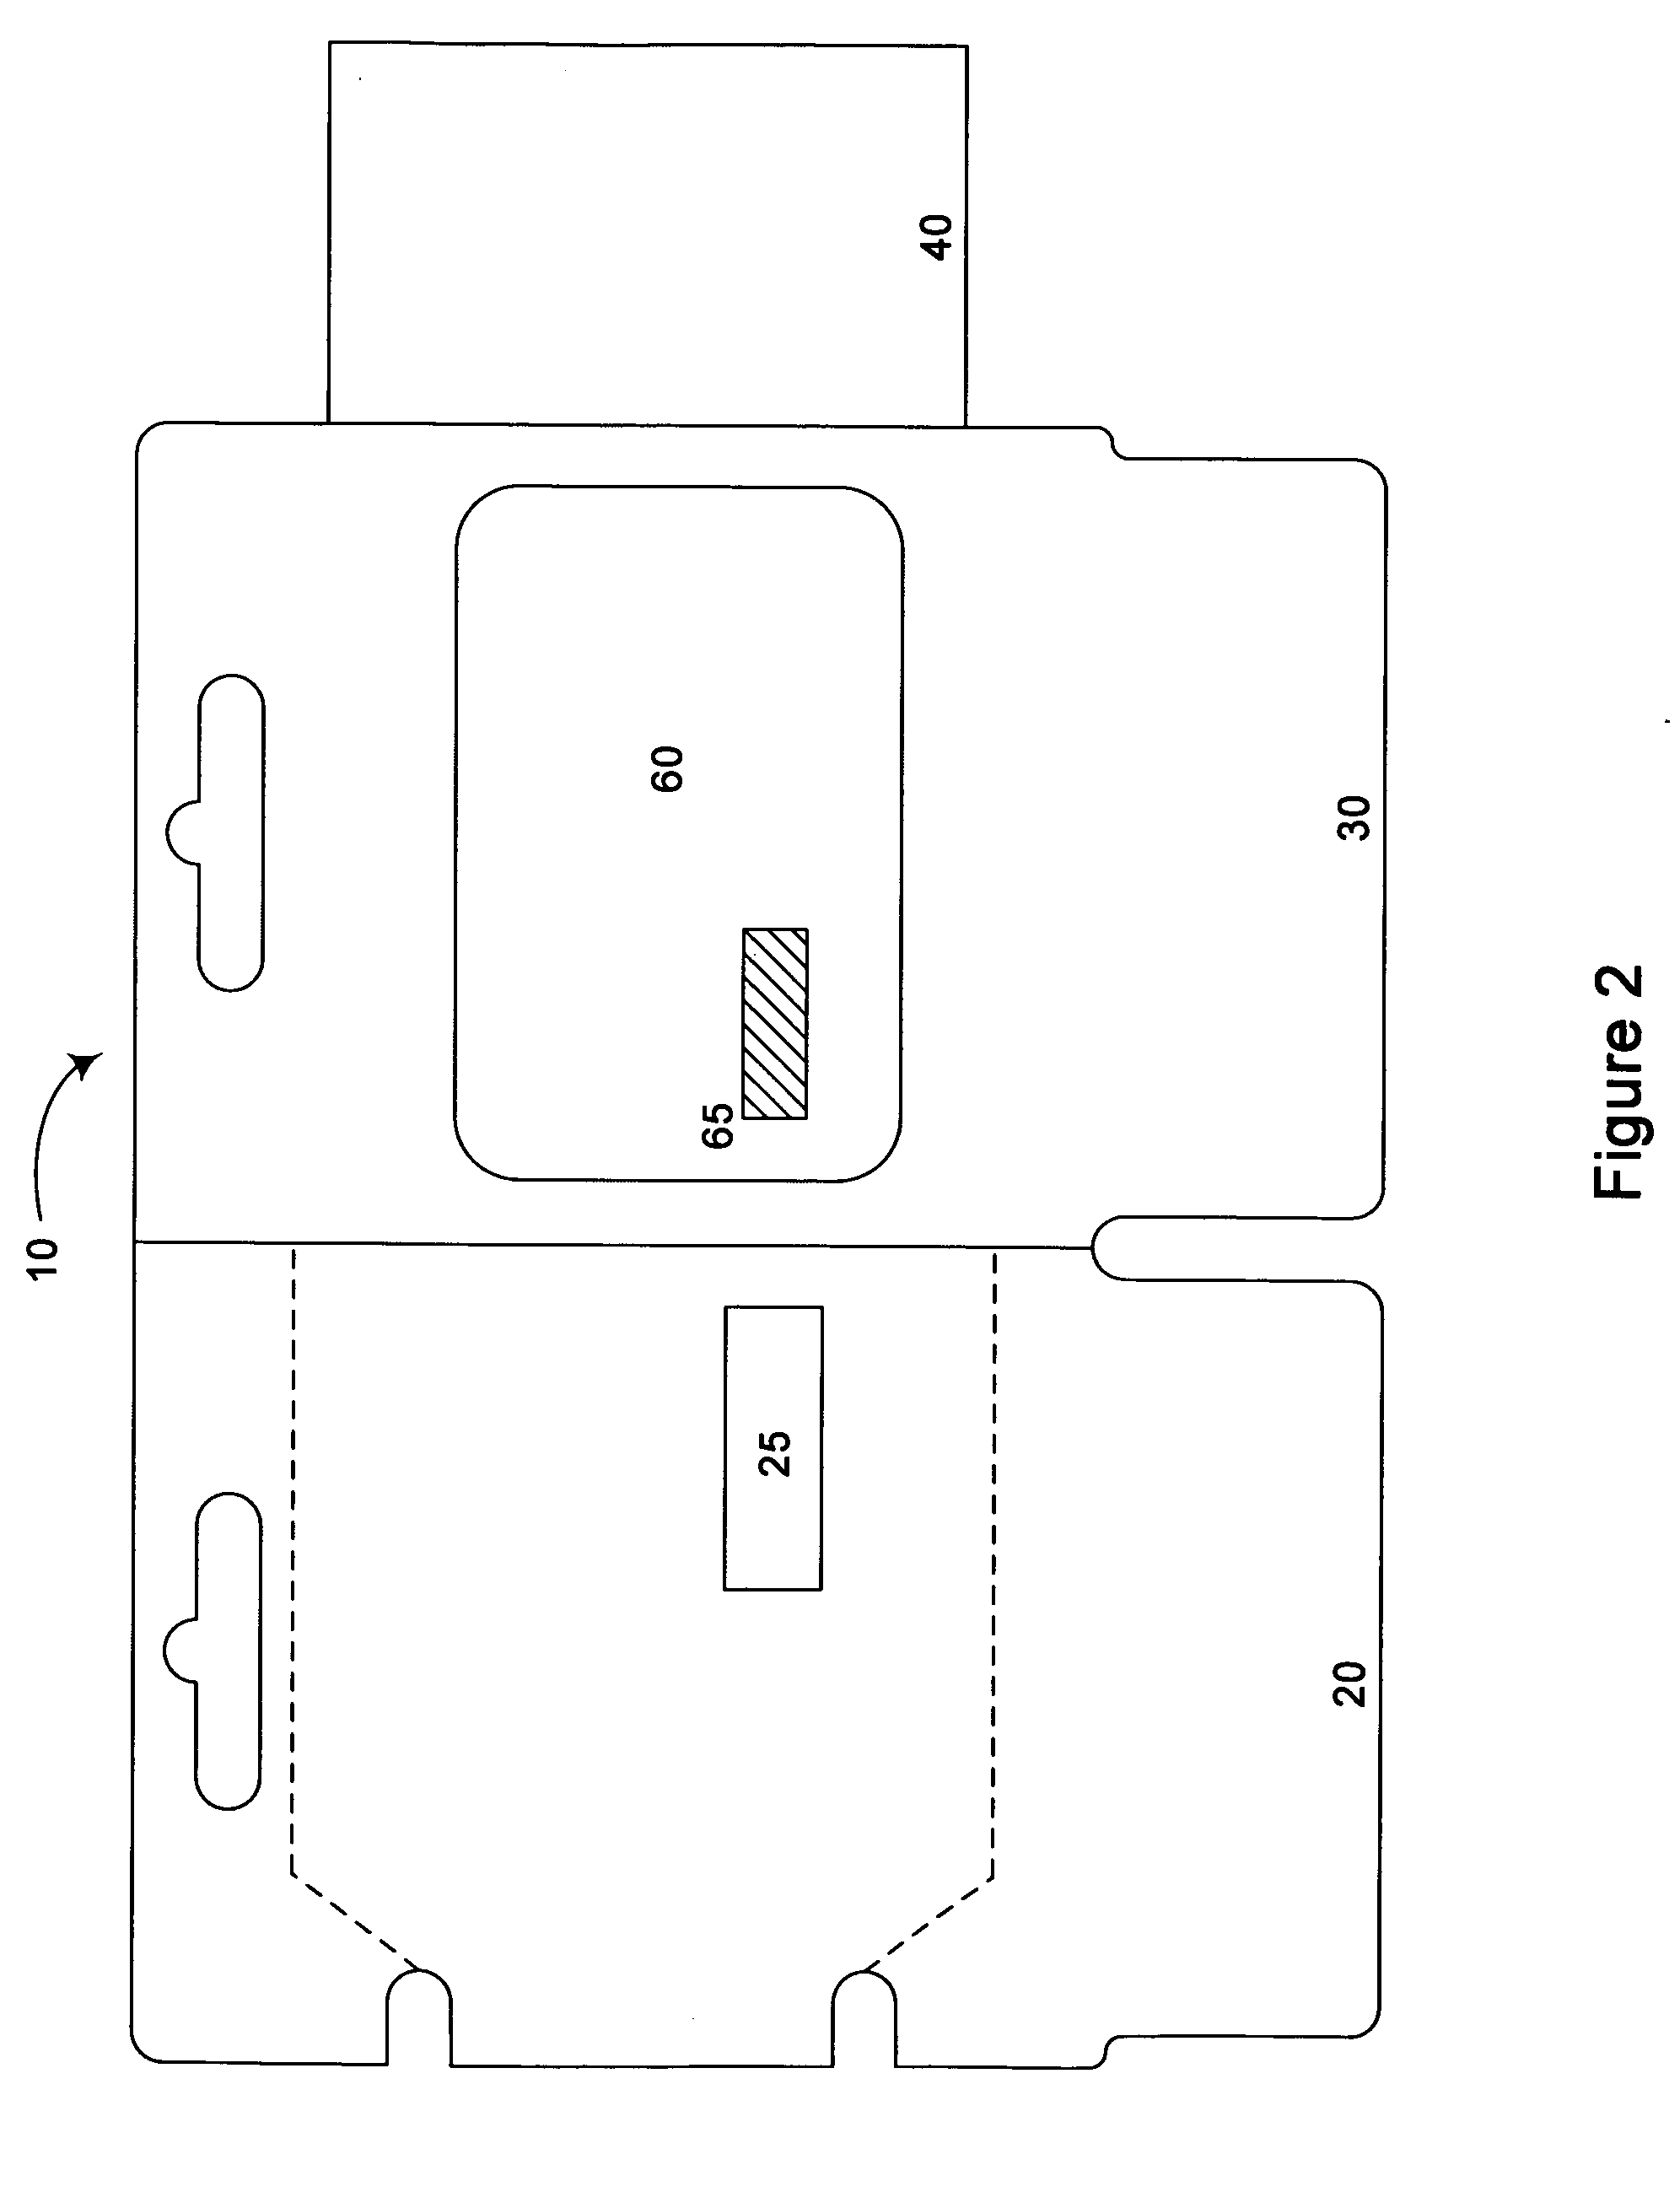 Foldable data card assembly and method